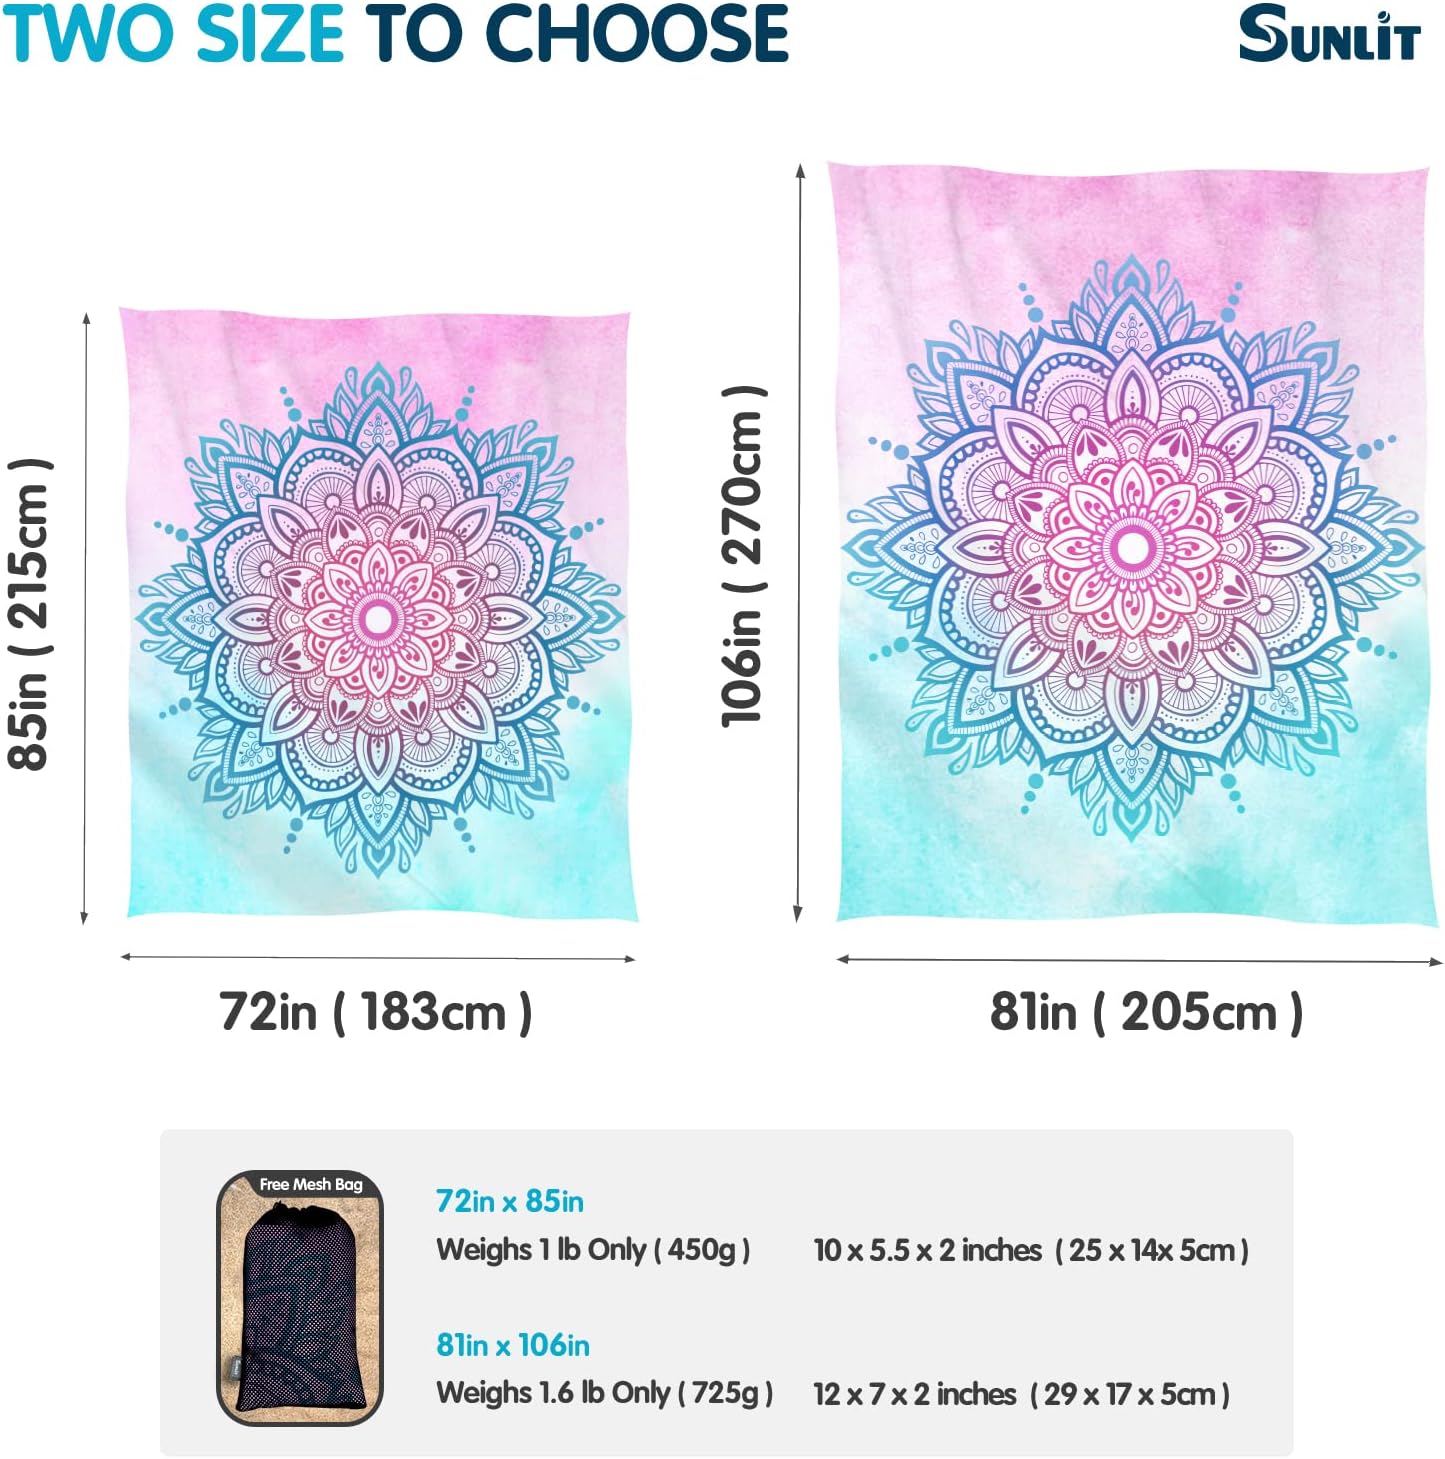 Sunlit Silky Soft 106"x81" Sand Proof Beach Blanket Sand Proof Mat with Corner Pockets and Mesh Bag for Beach Party, Travel, Camping and Outdoor Music Festival, Watercolor Sky Blue Light Pink Mandala